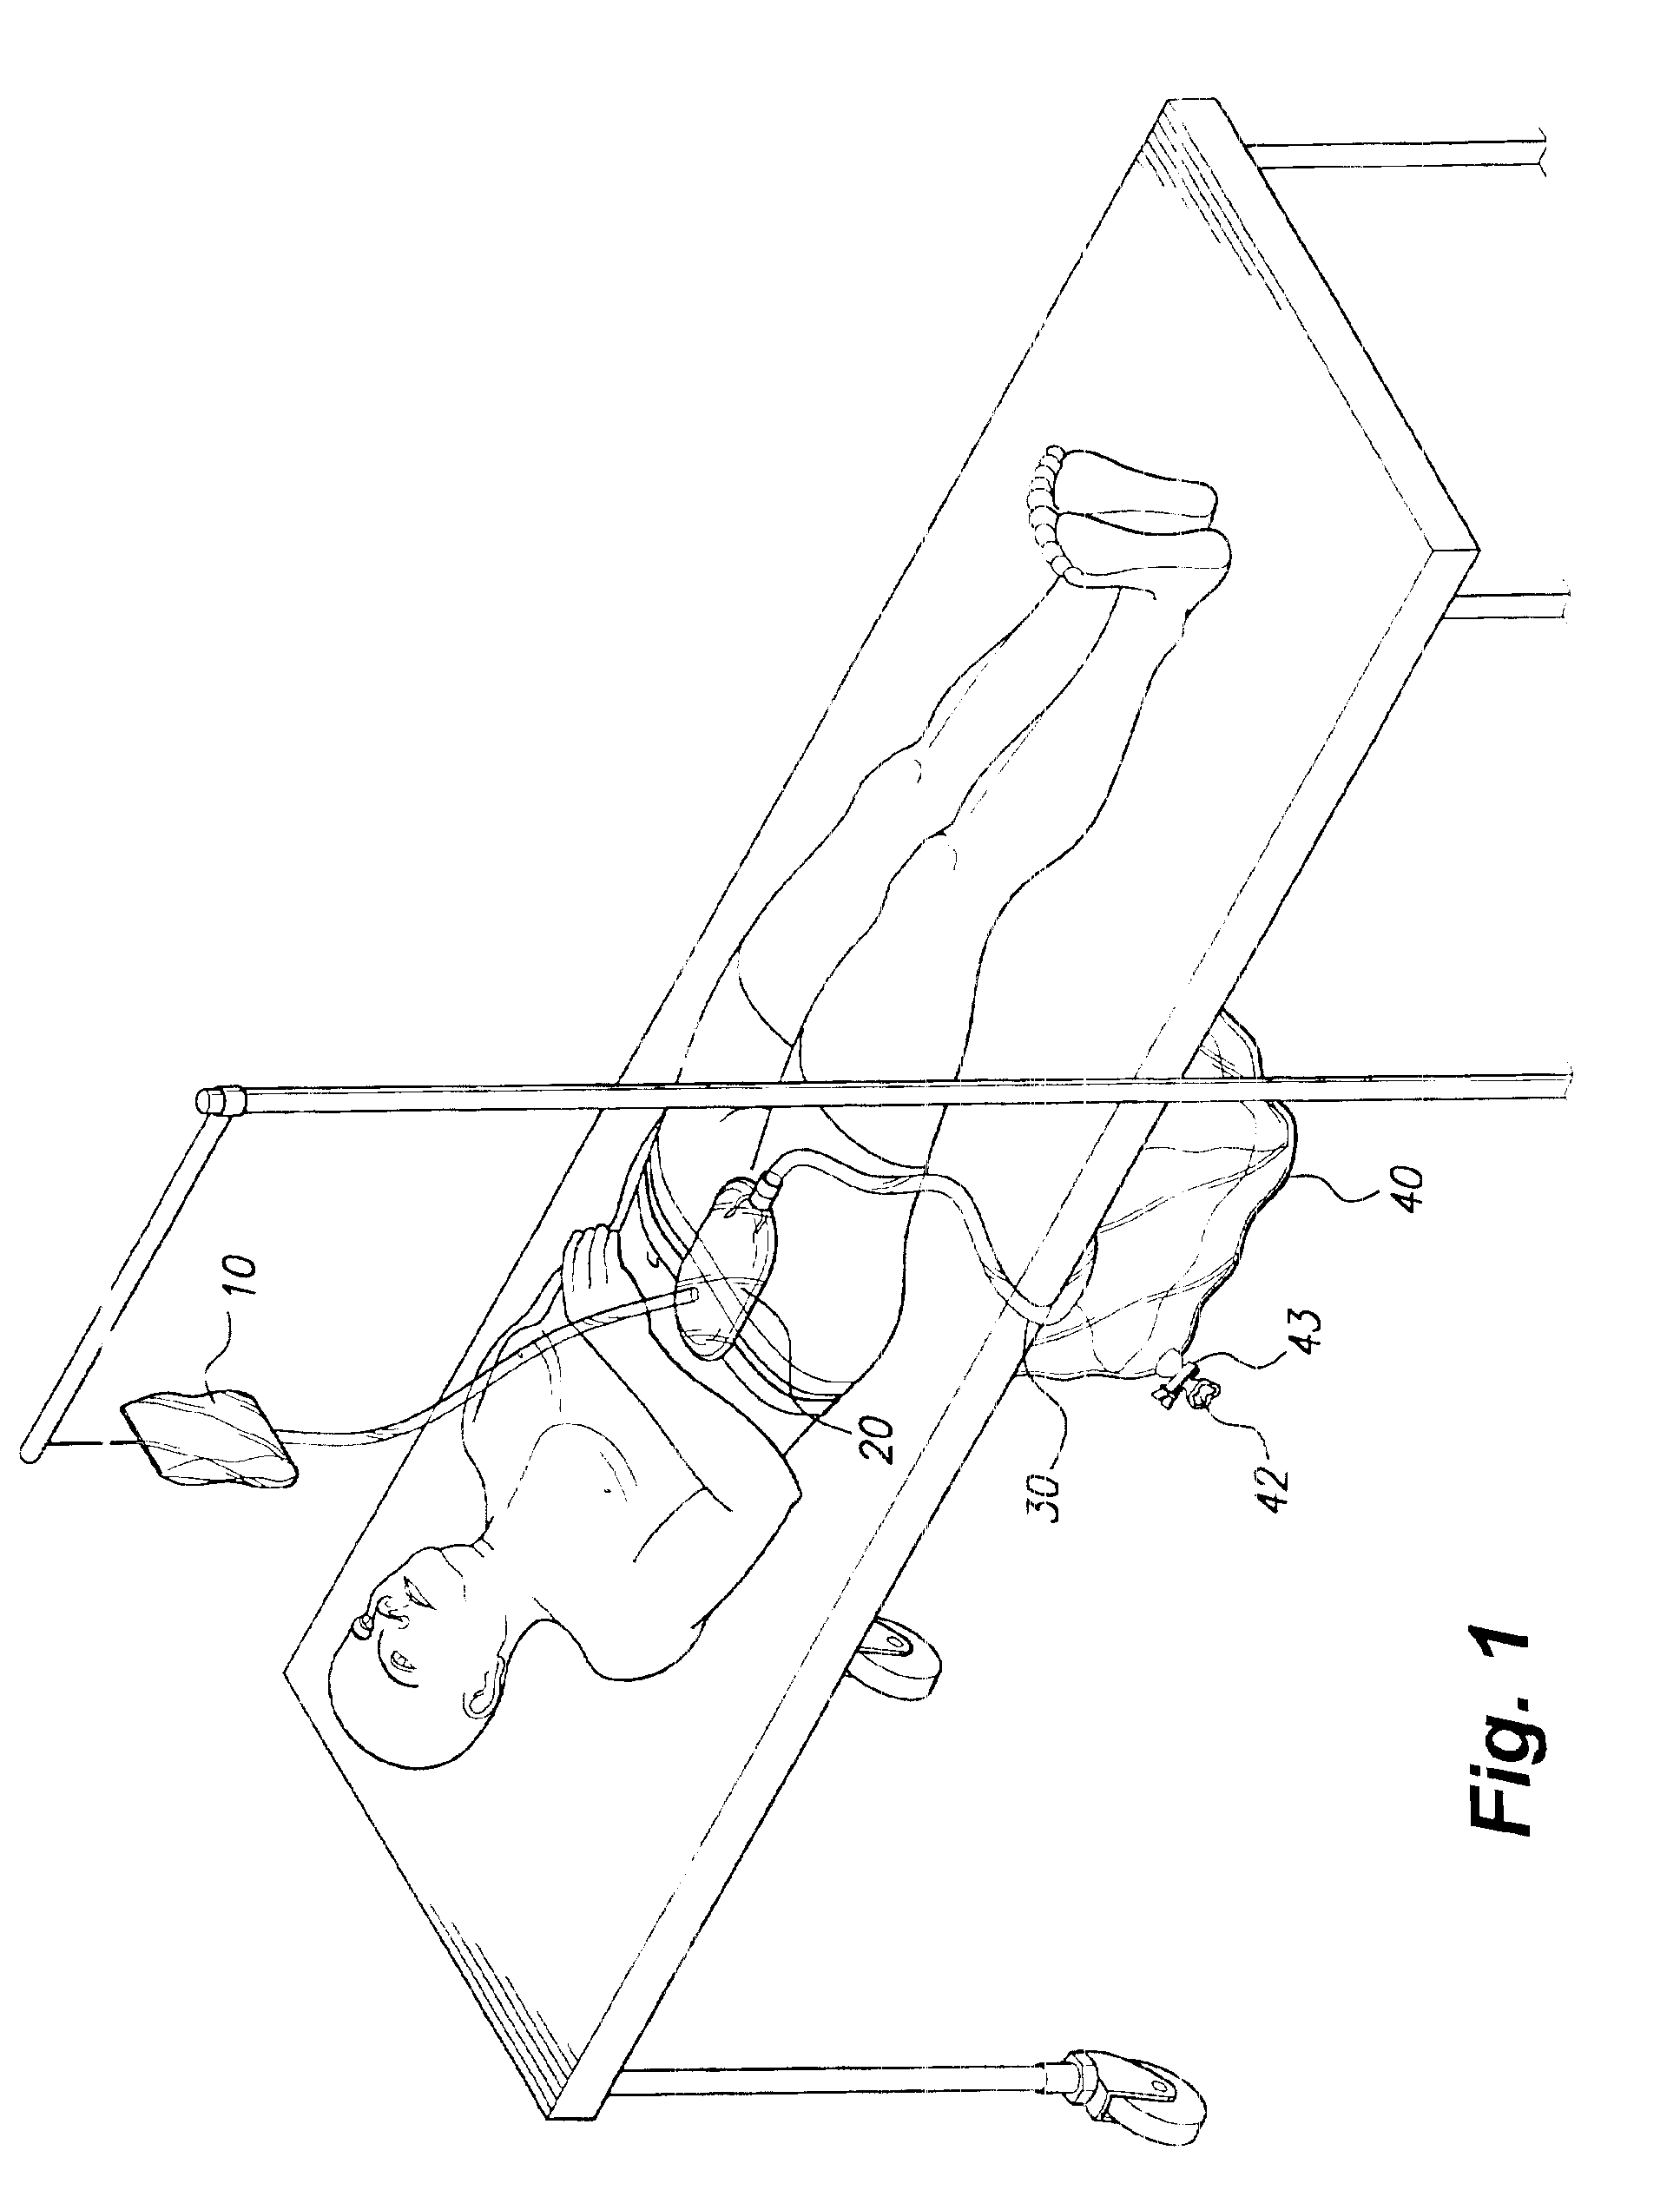 Closed drainage system for irrigating ostomies